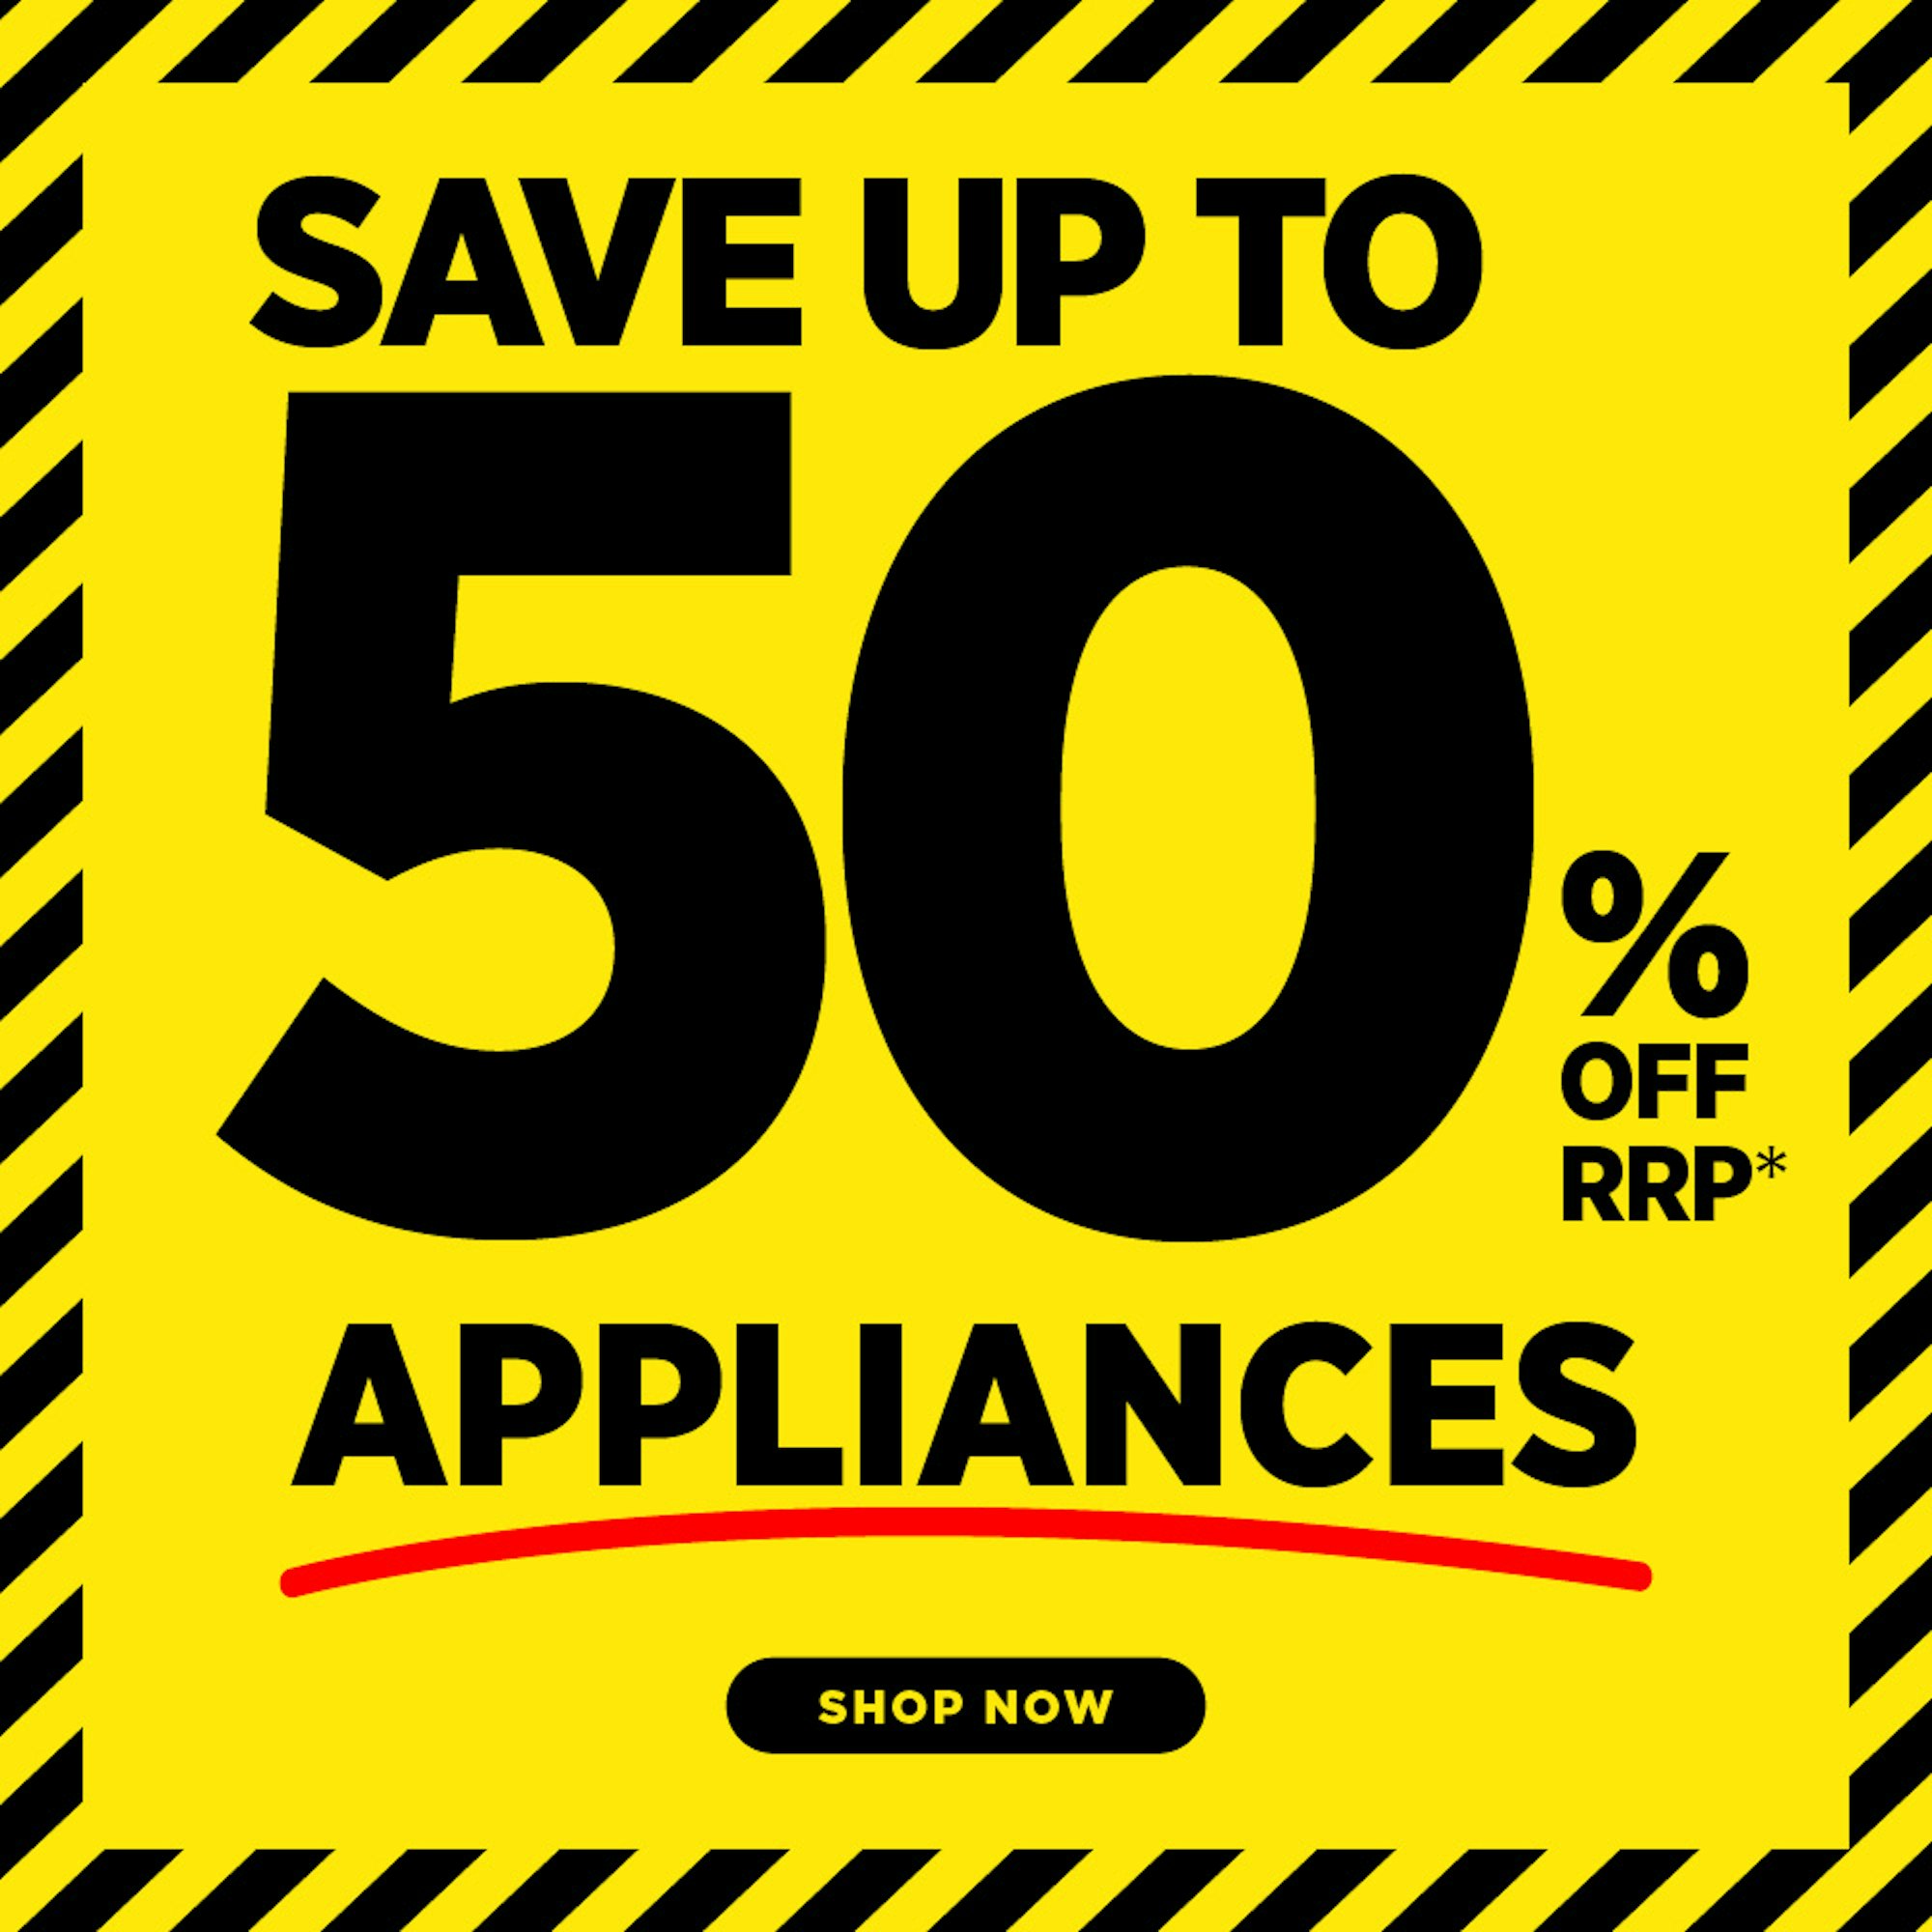 appliances up to 50% off